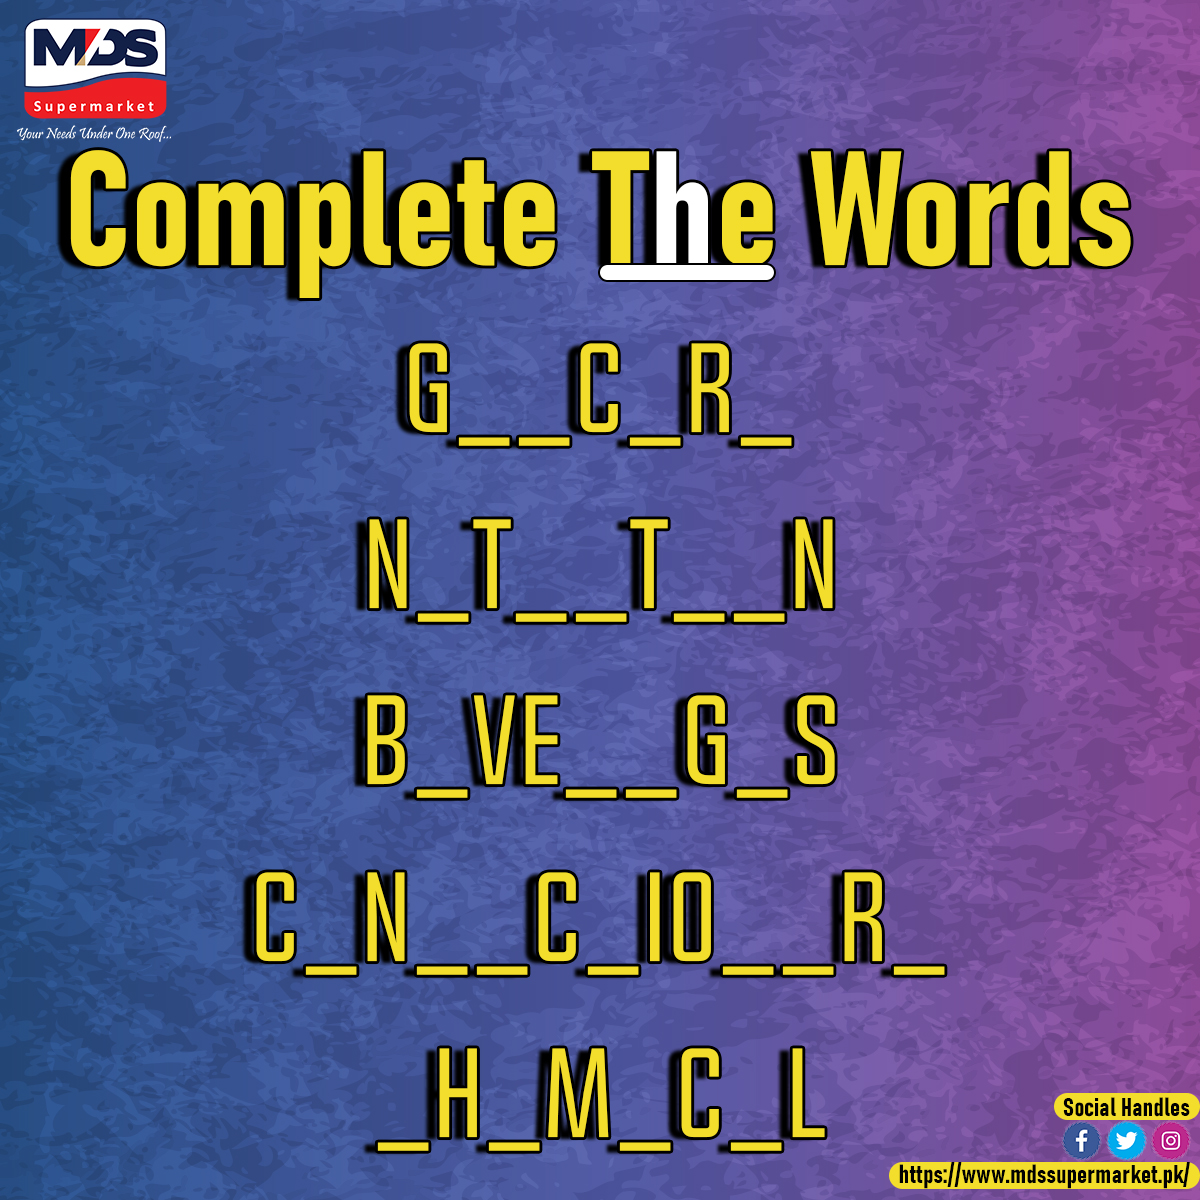 Boost your child's vocabulary and language skills with Complete the Words books available now at MDS Supermarket! 

Visit us at:

Branch 1: Toghi Road, Quetta | Call us at (081-2823444)

Branch 2: Quarry Road, Quetta | Call us at (081-2823420)

#CompleteTheWords #educationalbooks